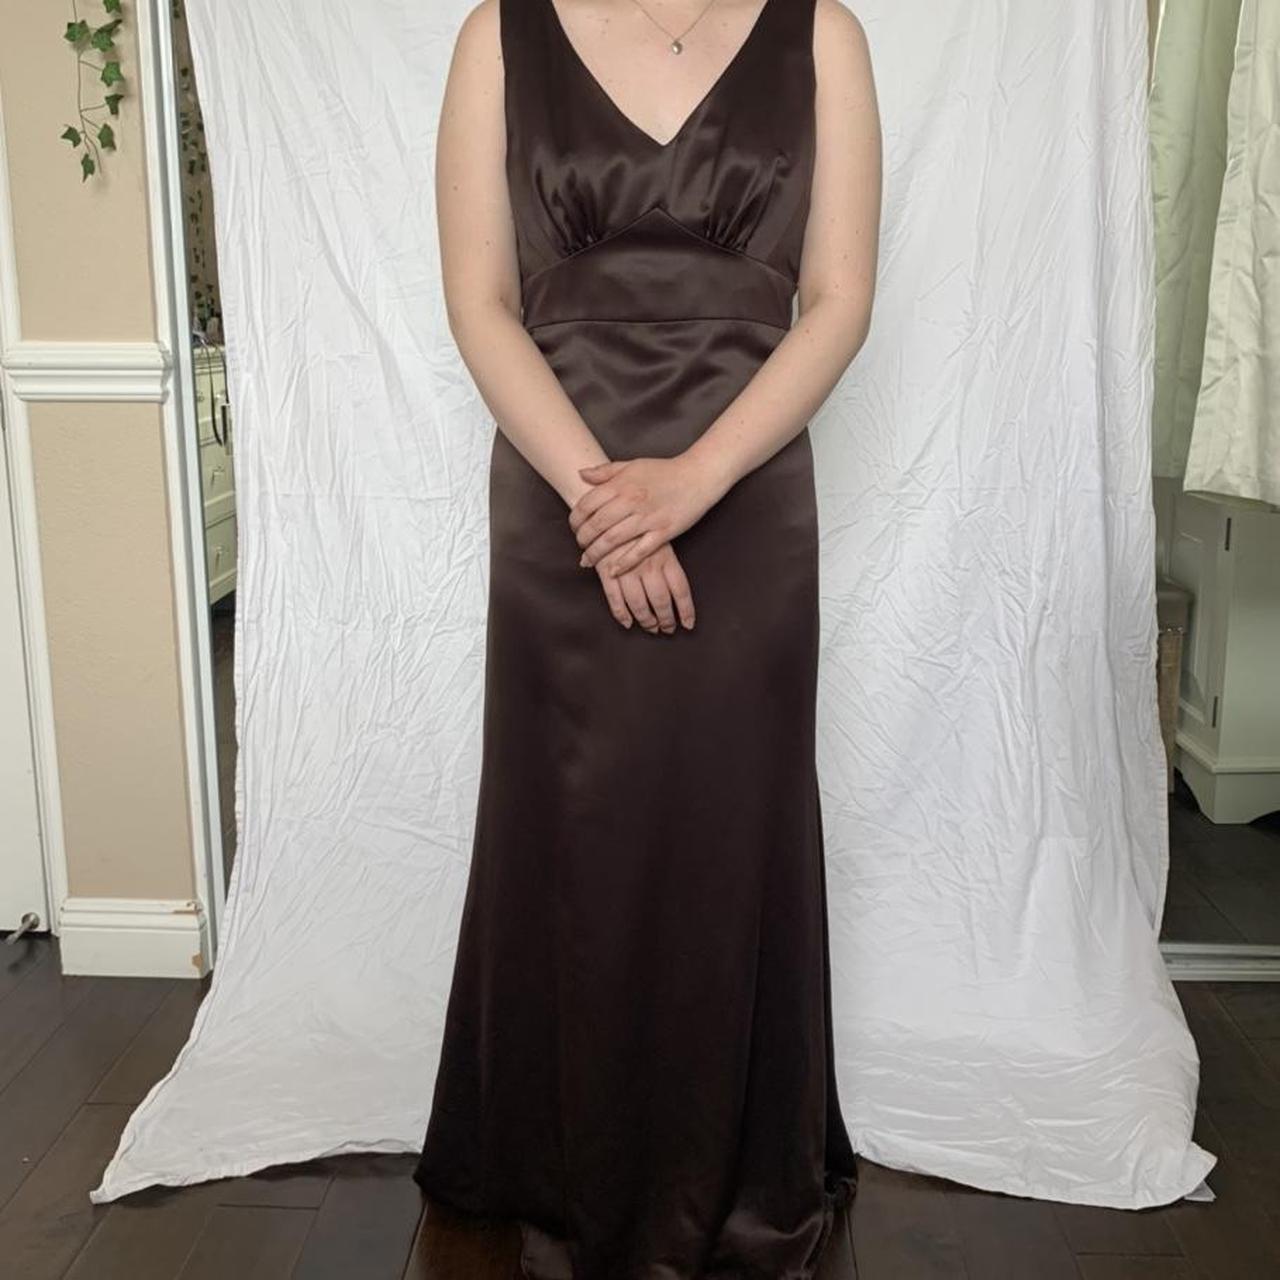 Product Image 2 - chocolate brown prom dress!!

tie in